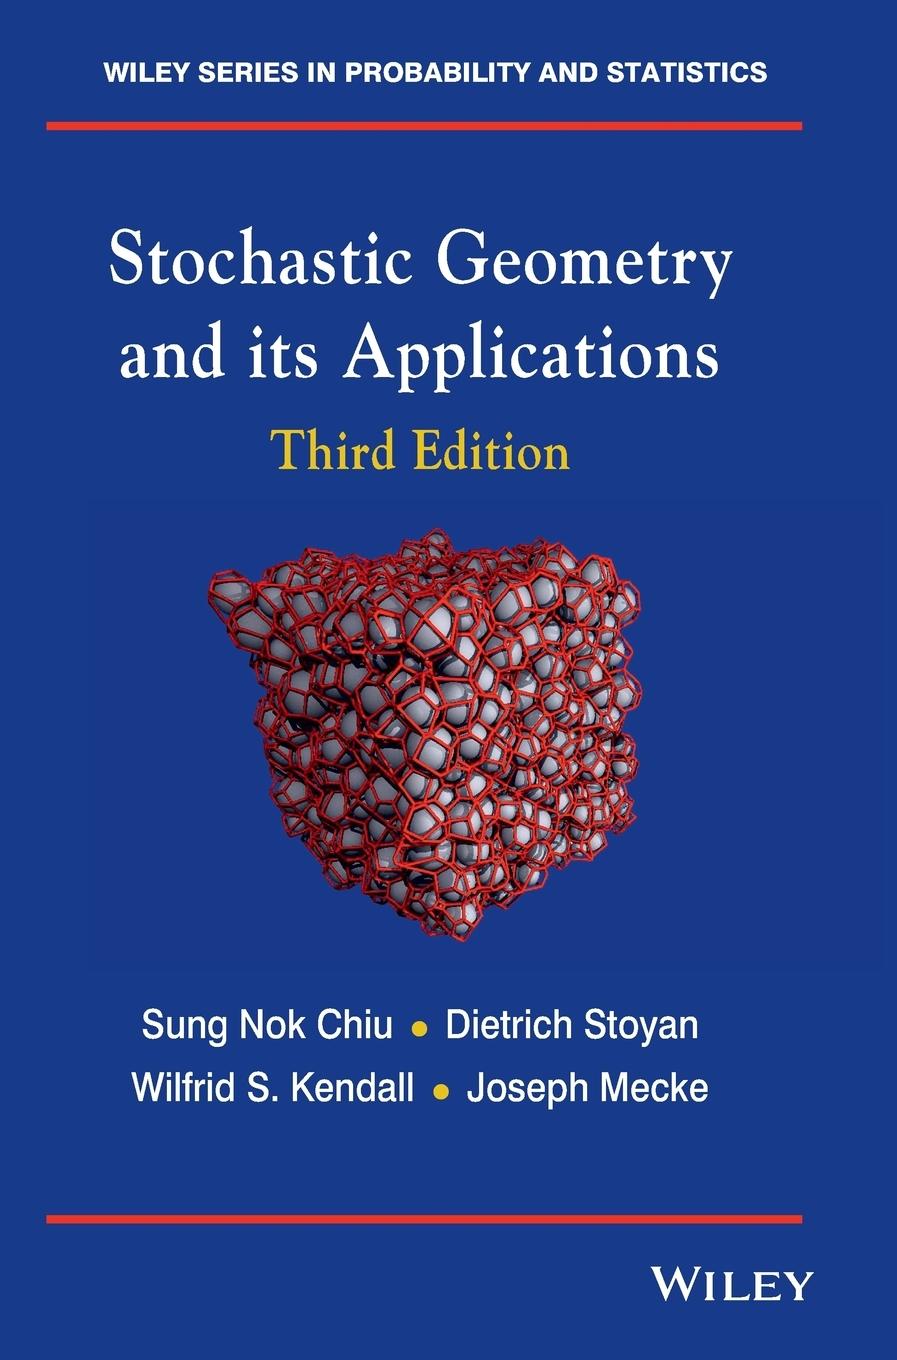 Stochastic Geometry and Its Applications - Sung Nok Chiu|Dietrich Stoyan|Wilfrid S. Kendall|Joseph Mecke